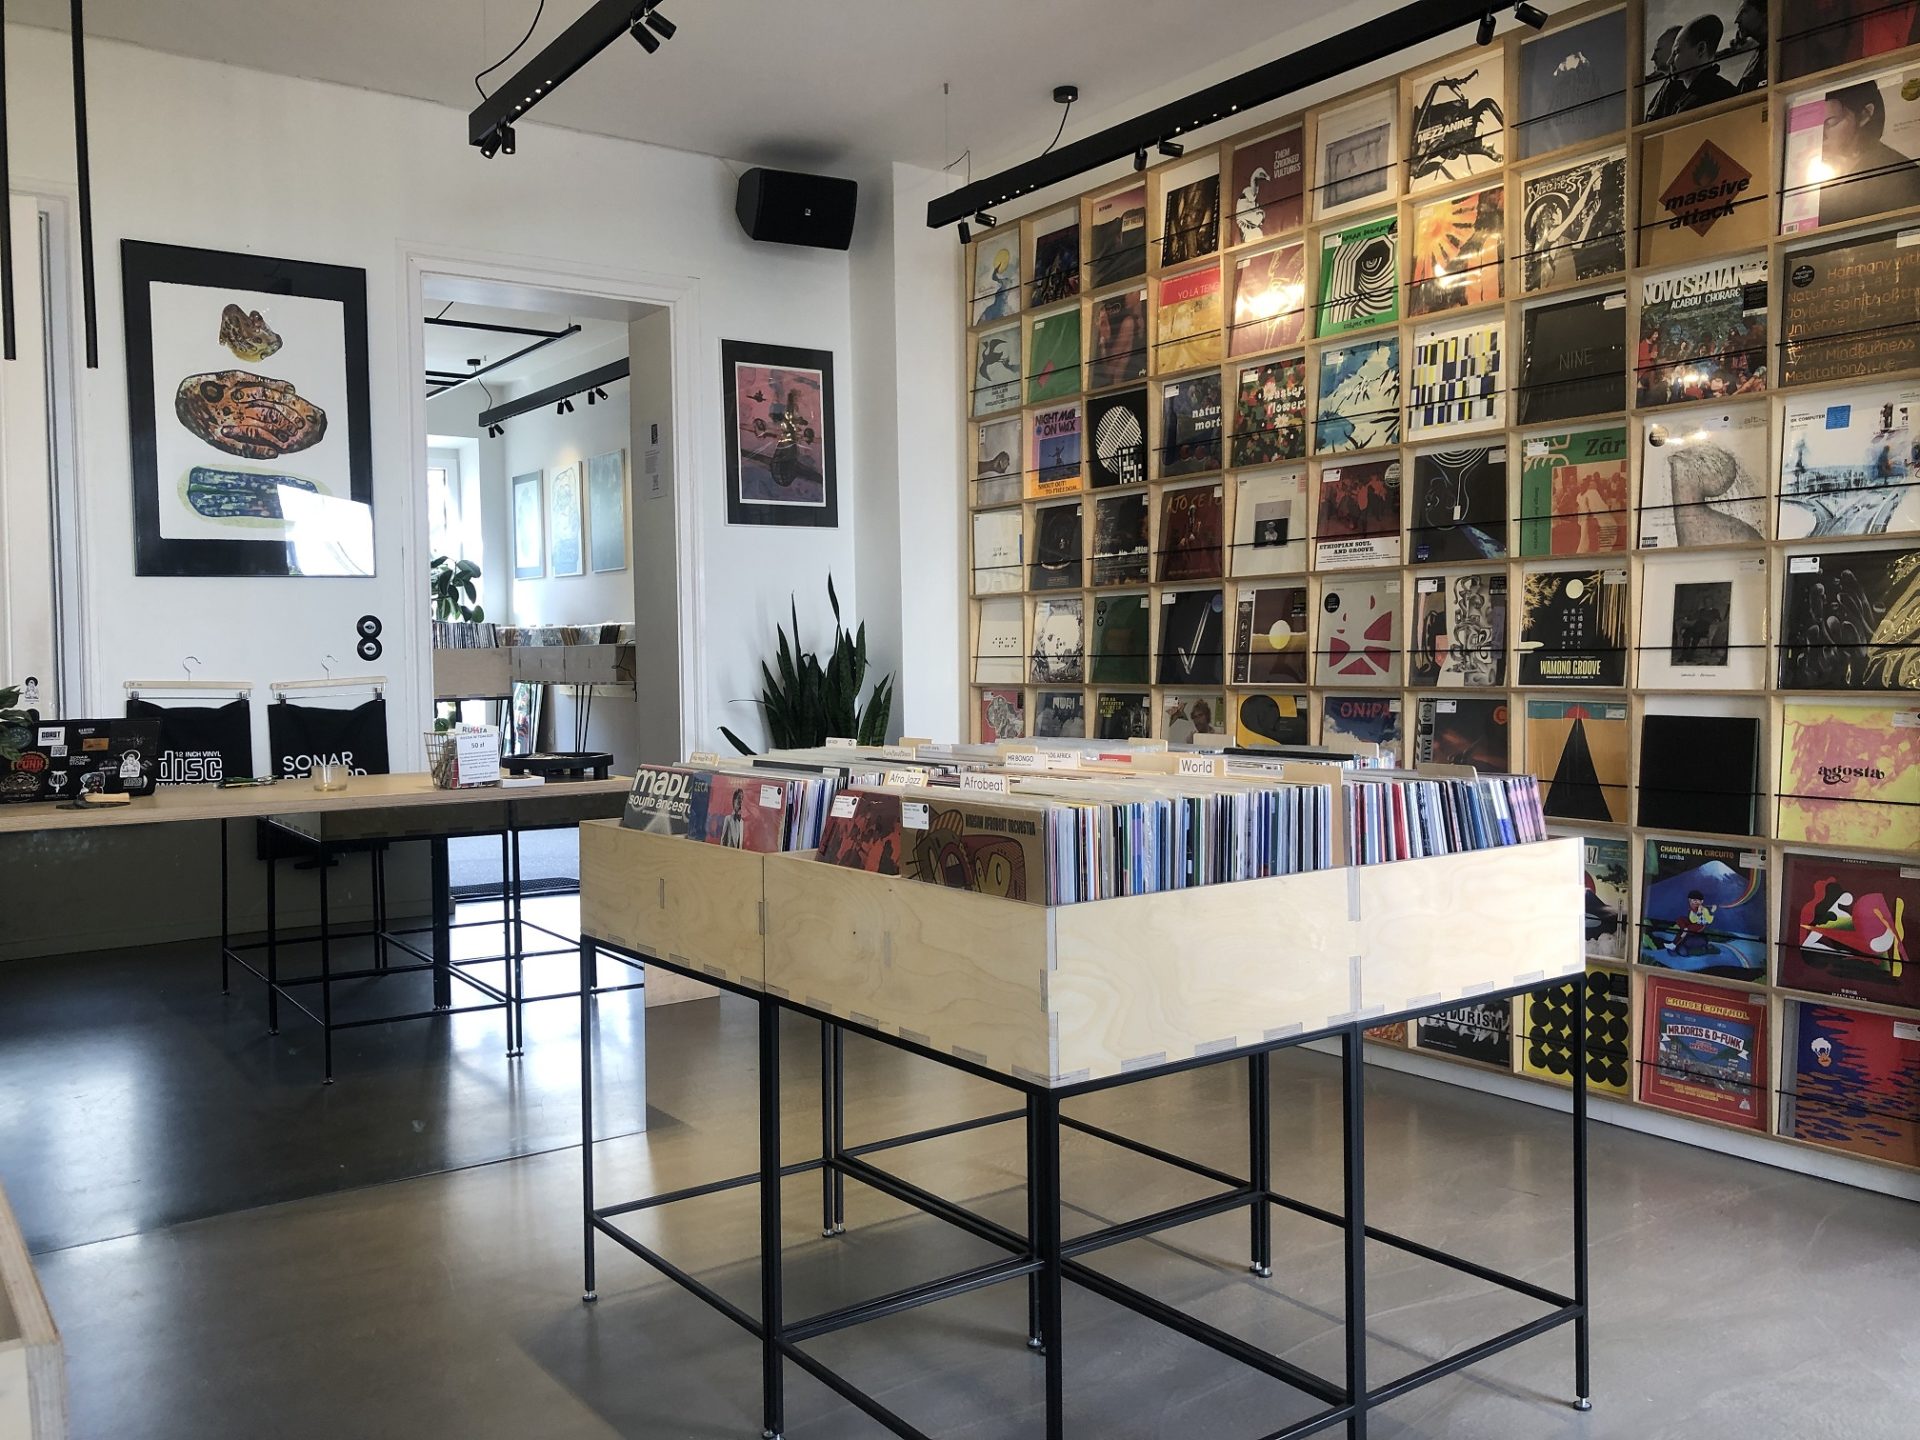 Sonar Record Store - 1 of 5